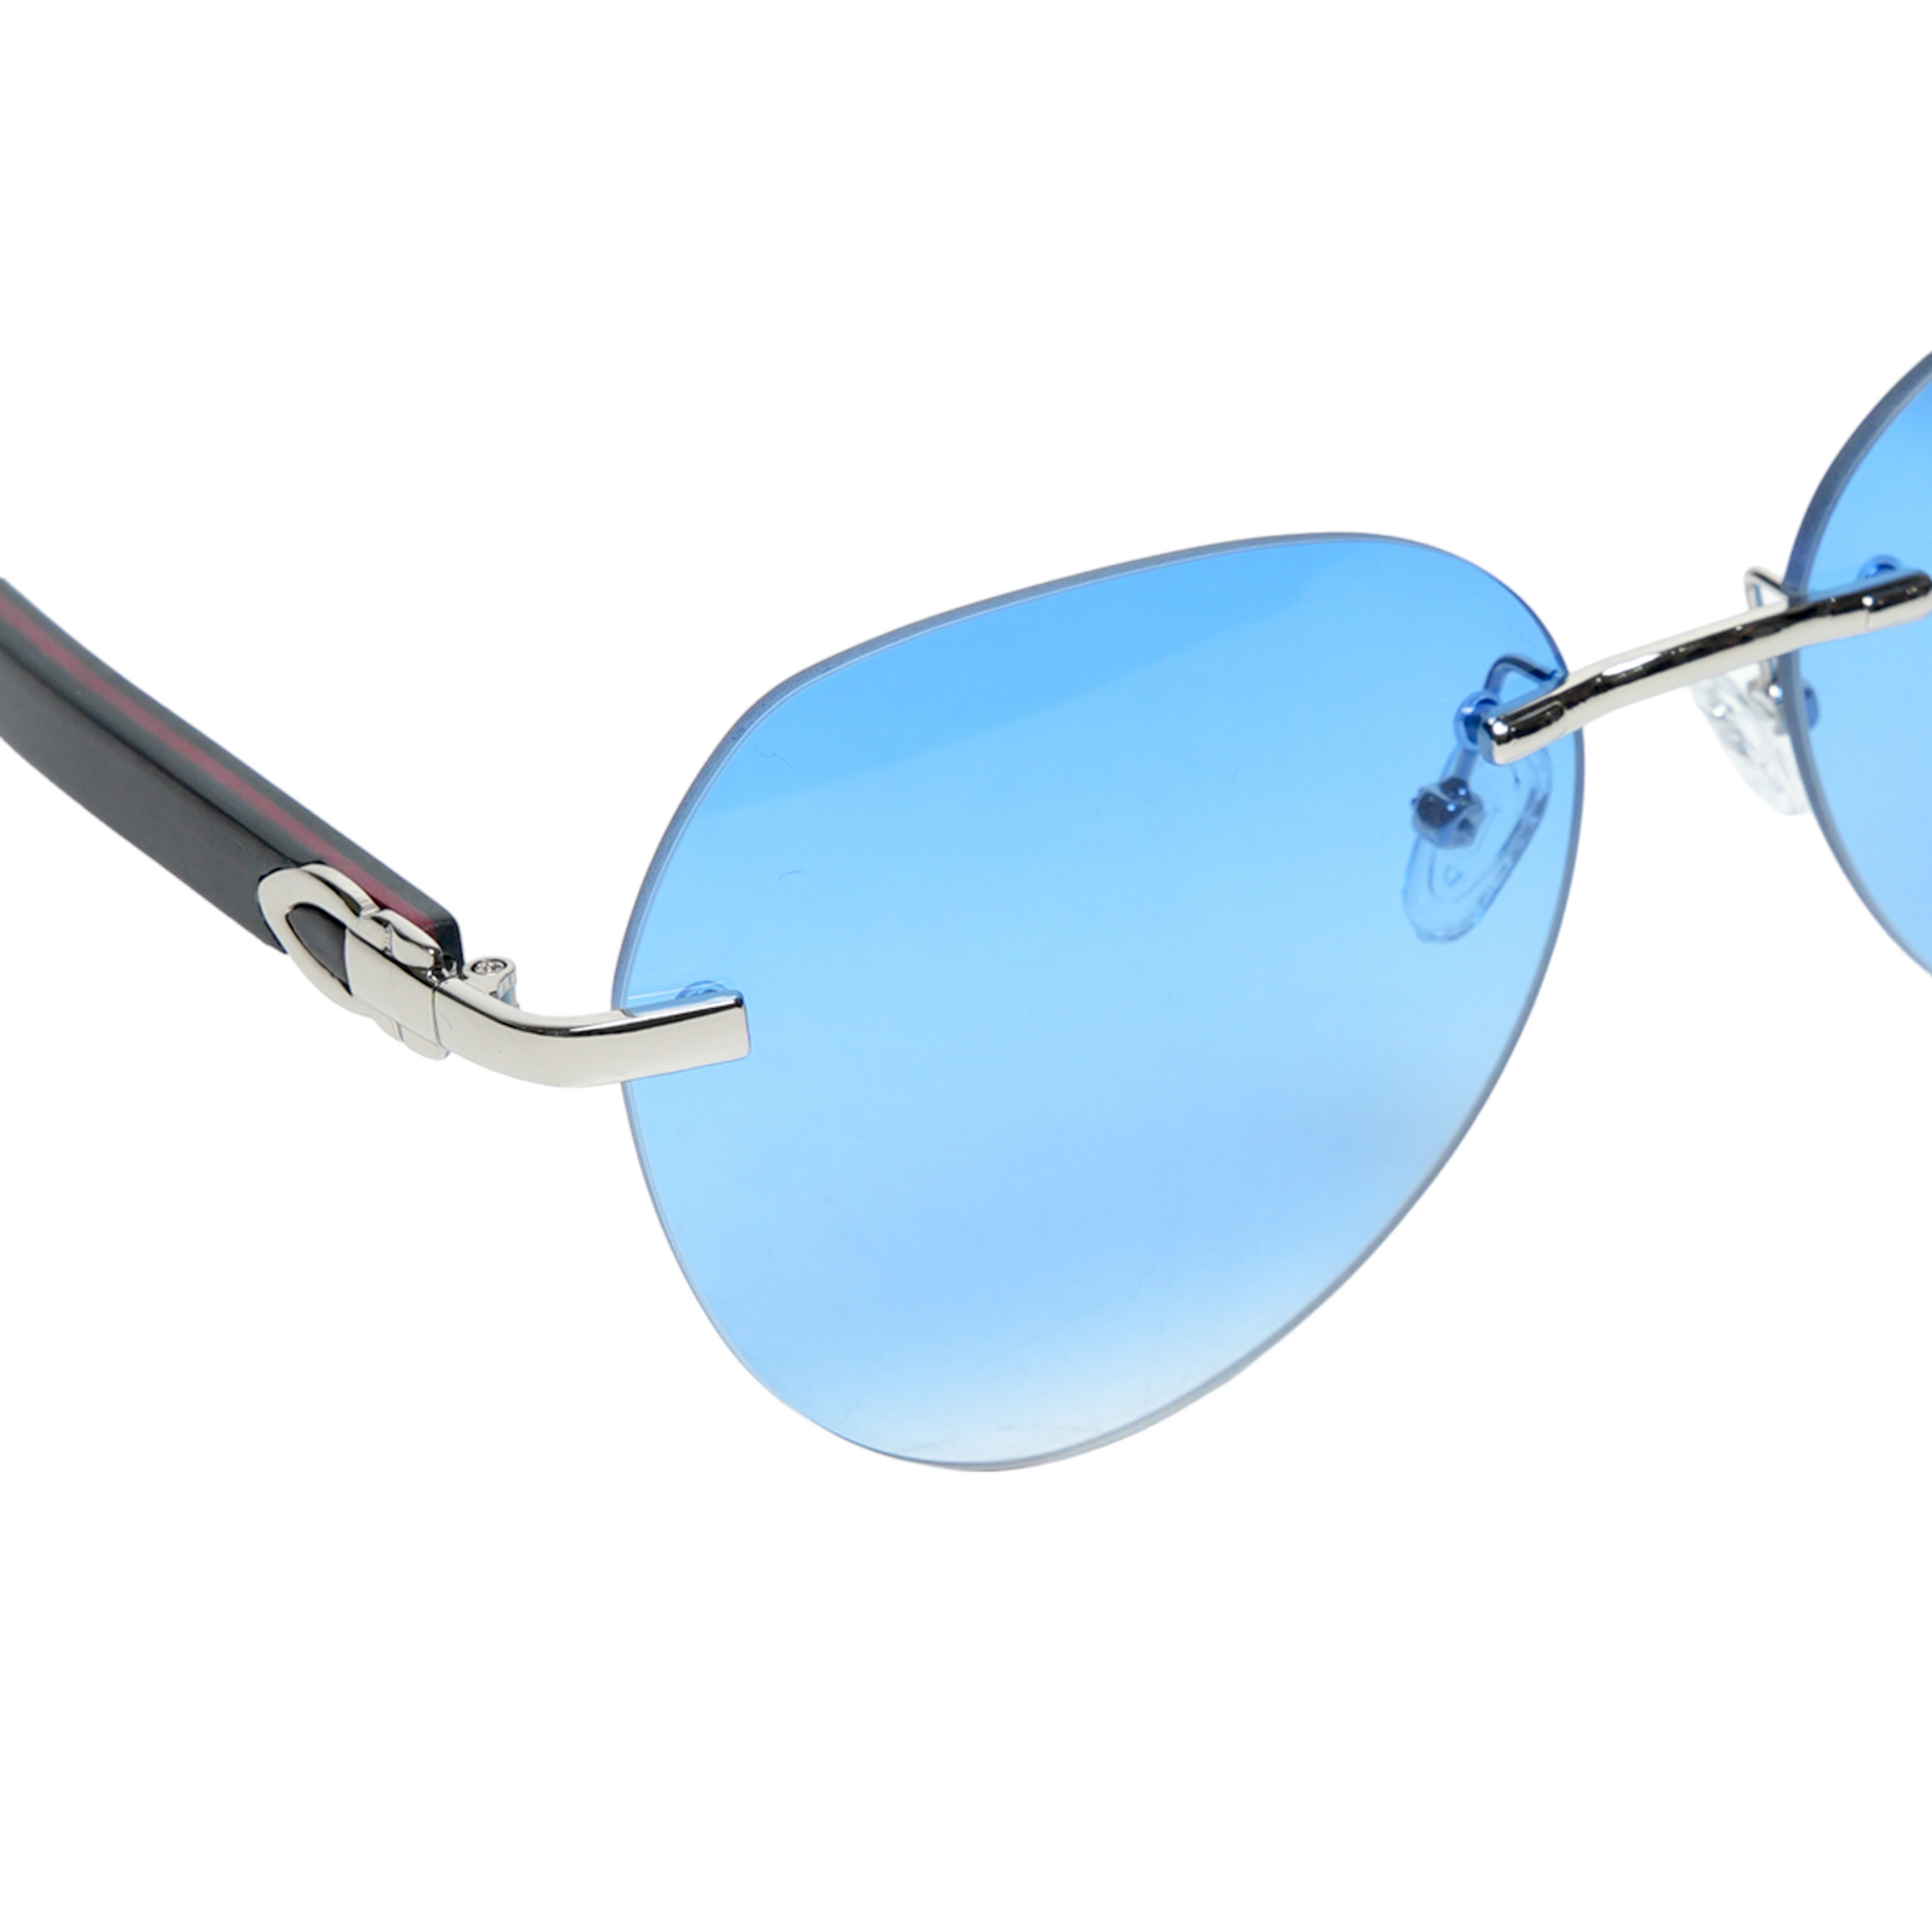 Chokore Rimless Oversized Sunglasses with Wooden Temple (Blue)